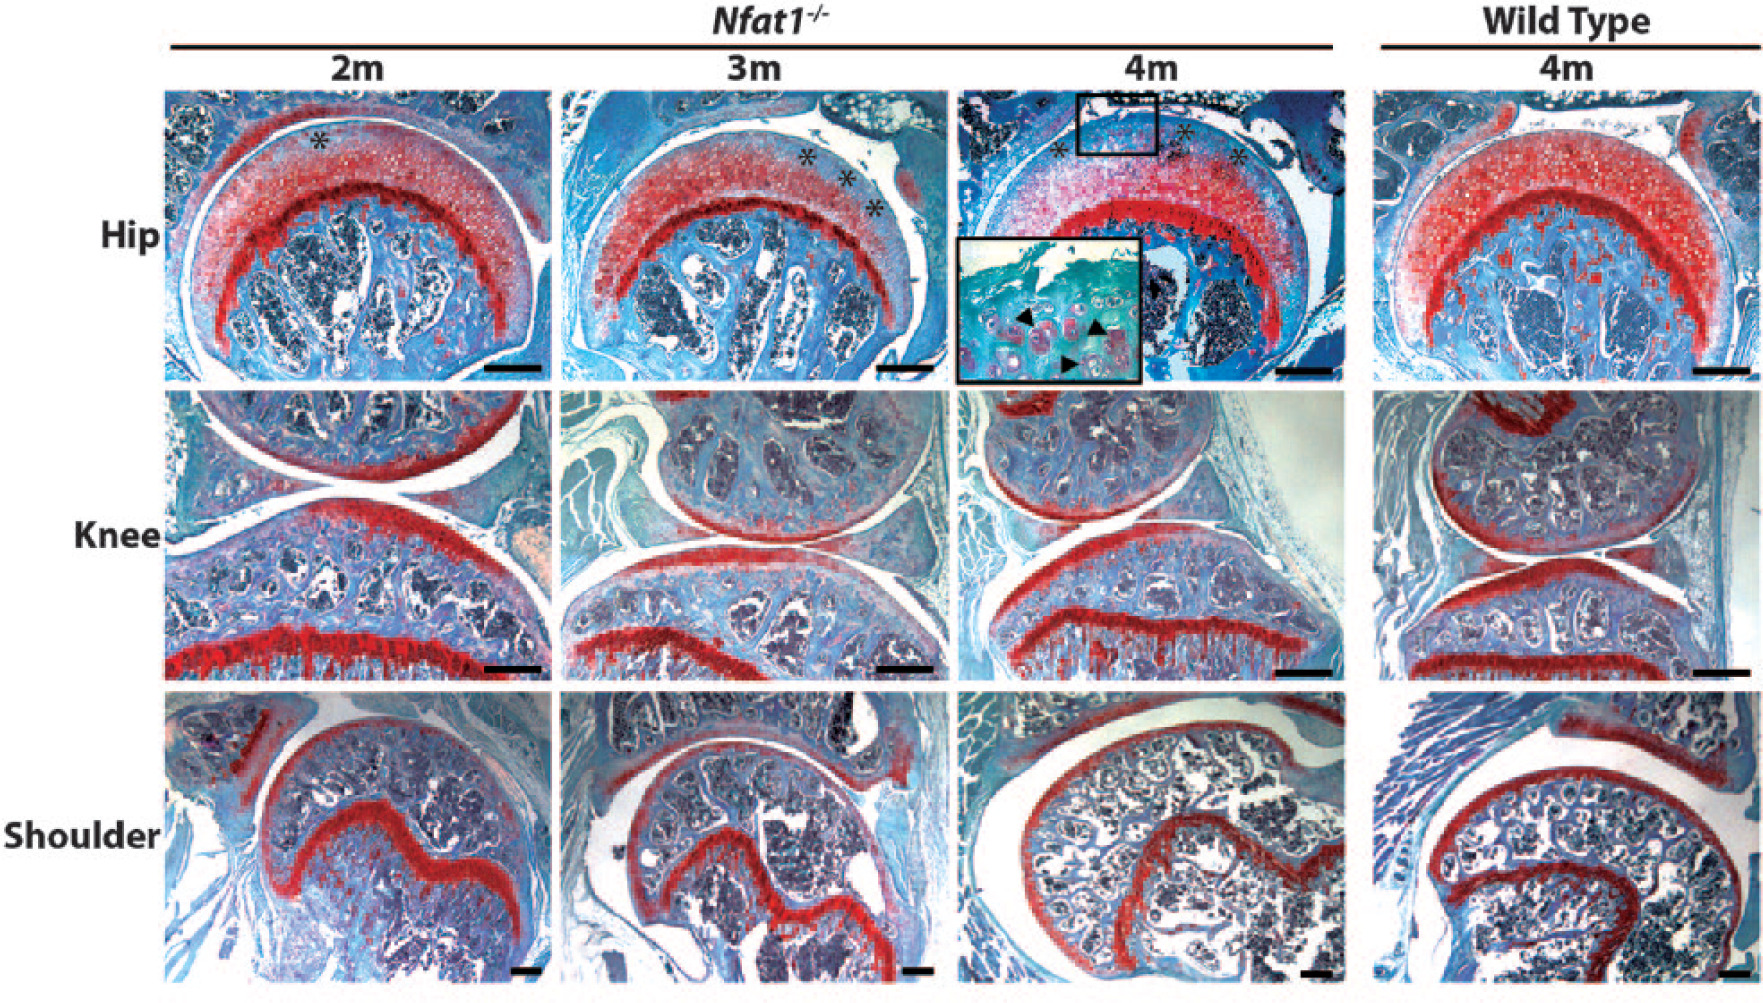 Fig. 1 
            Representative photomicrographs of hip, knee, and shoulder joints of two-, three-, and four-month-old female Nfat1-/- mice and four-month-old female wild-type (WT) mice showing that the early osteoarthritis (OA) phenotype appears in the Nfat1-/- hip (femoral head), but not in the Nfat1-/- knees or shoulders. *indicates the area with loss of Safranin-O staining and arrowheads in the enlarged image from the rectangular box denote chondrocyte clustering (a typical feature of OA) in an Nfat1-/- femoral head. Safranin-O and fast green stain, scale bar = 200 µm.
          